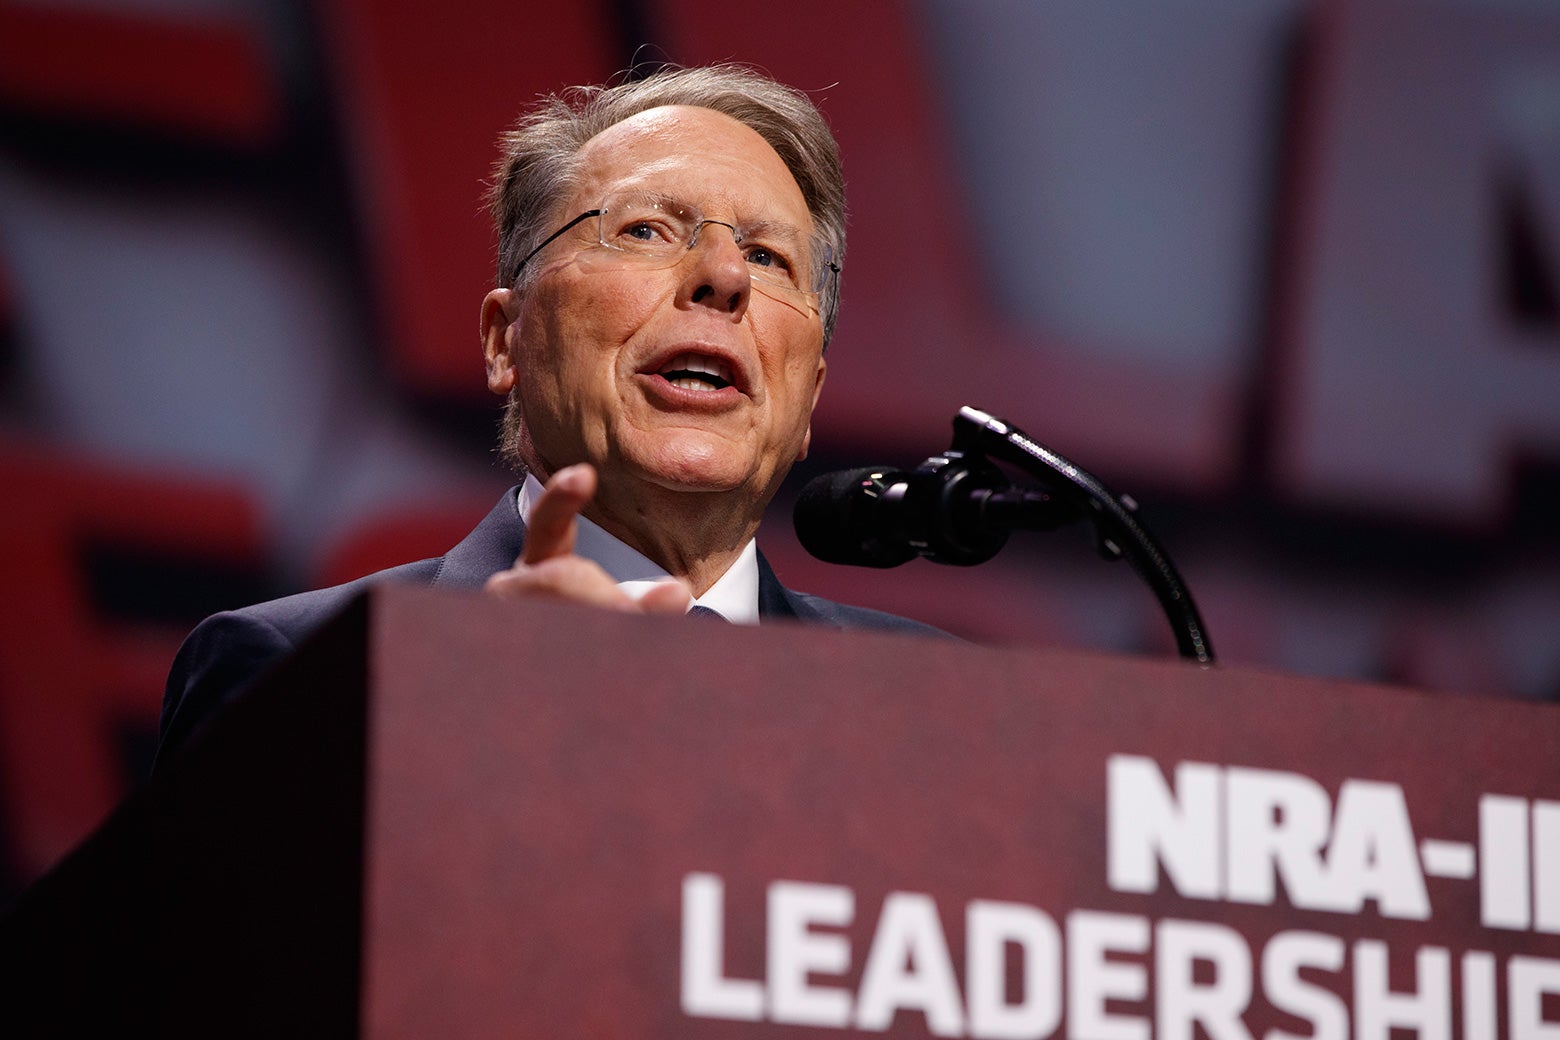 The NRA’s Wayne LaPierre speaks at a conference on April 28 in Atlanta.